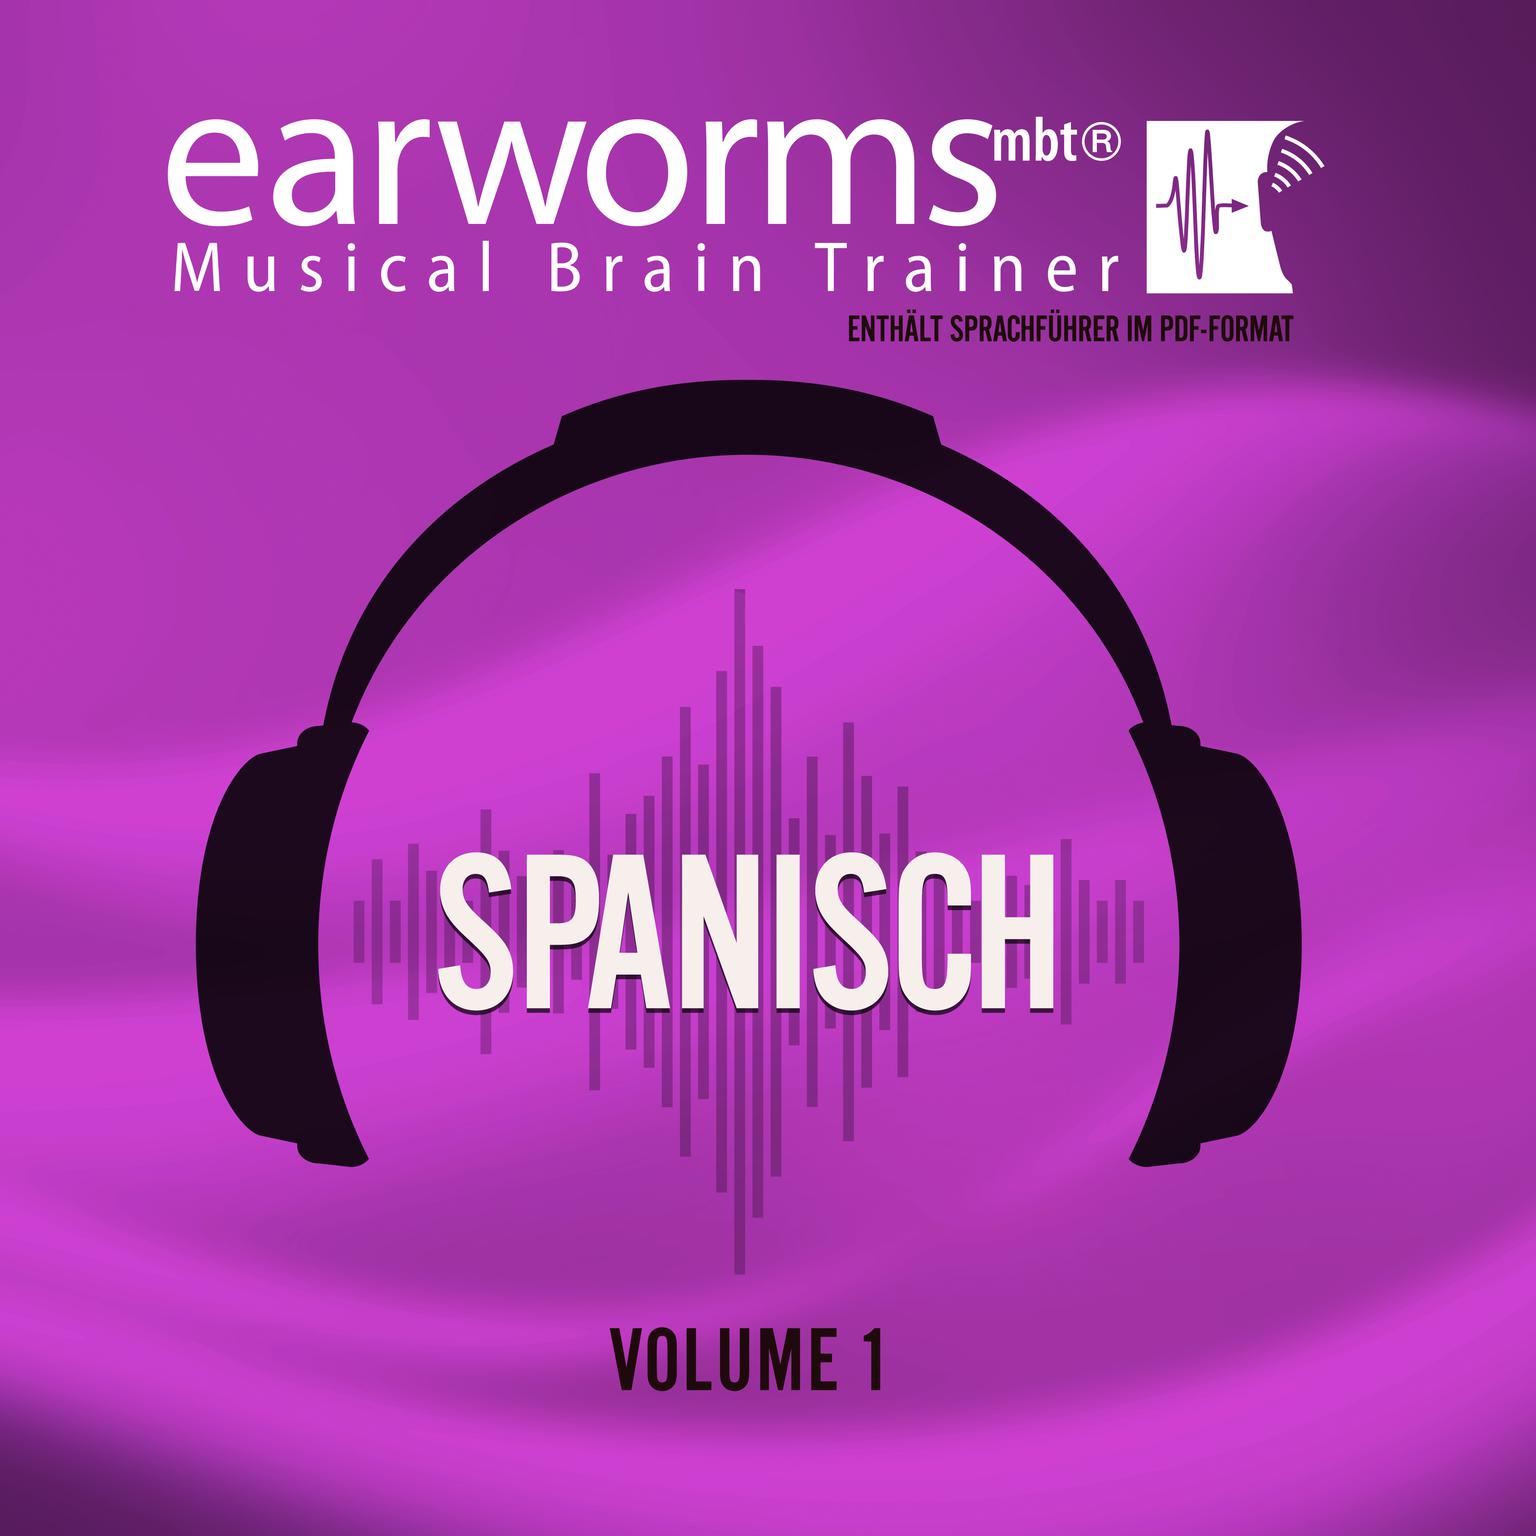 Spanisch, Vol. 1 Audiobook, by Earworms Learning